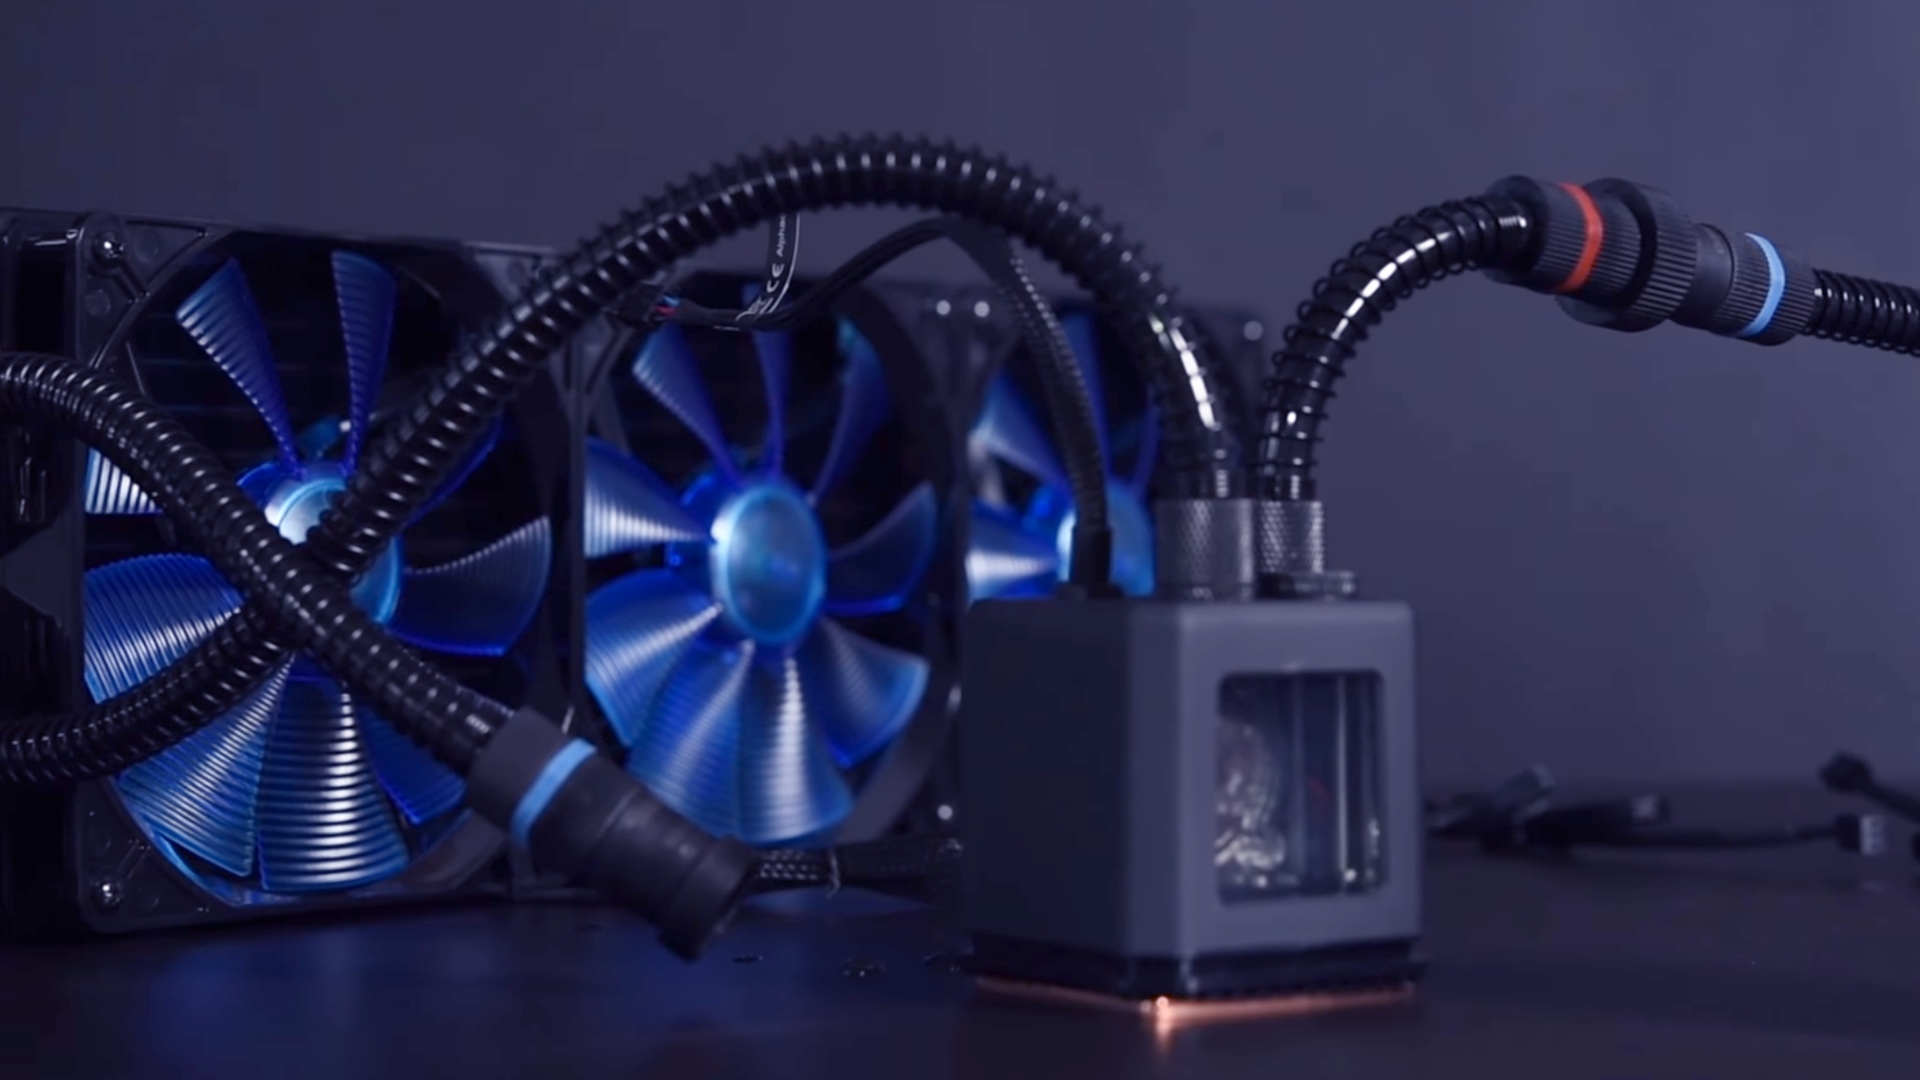 best cooling cooler price